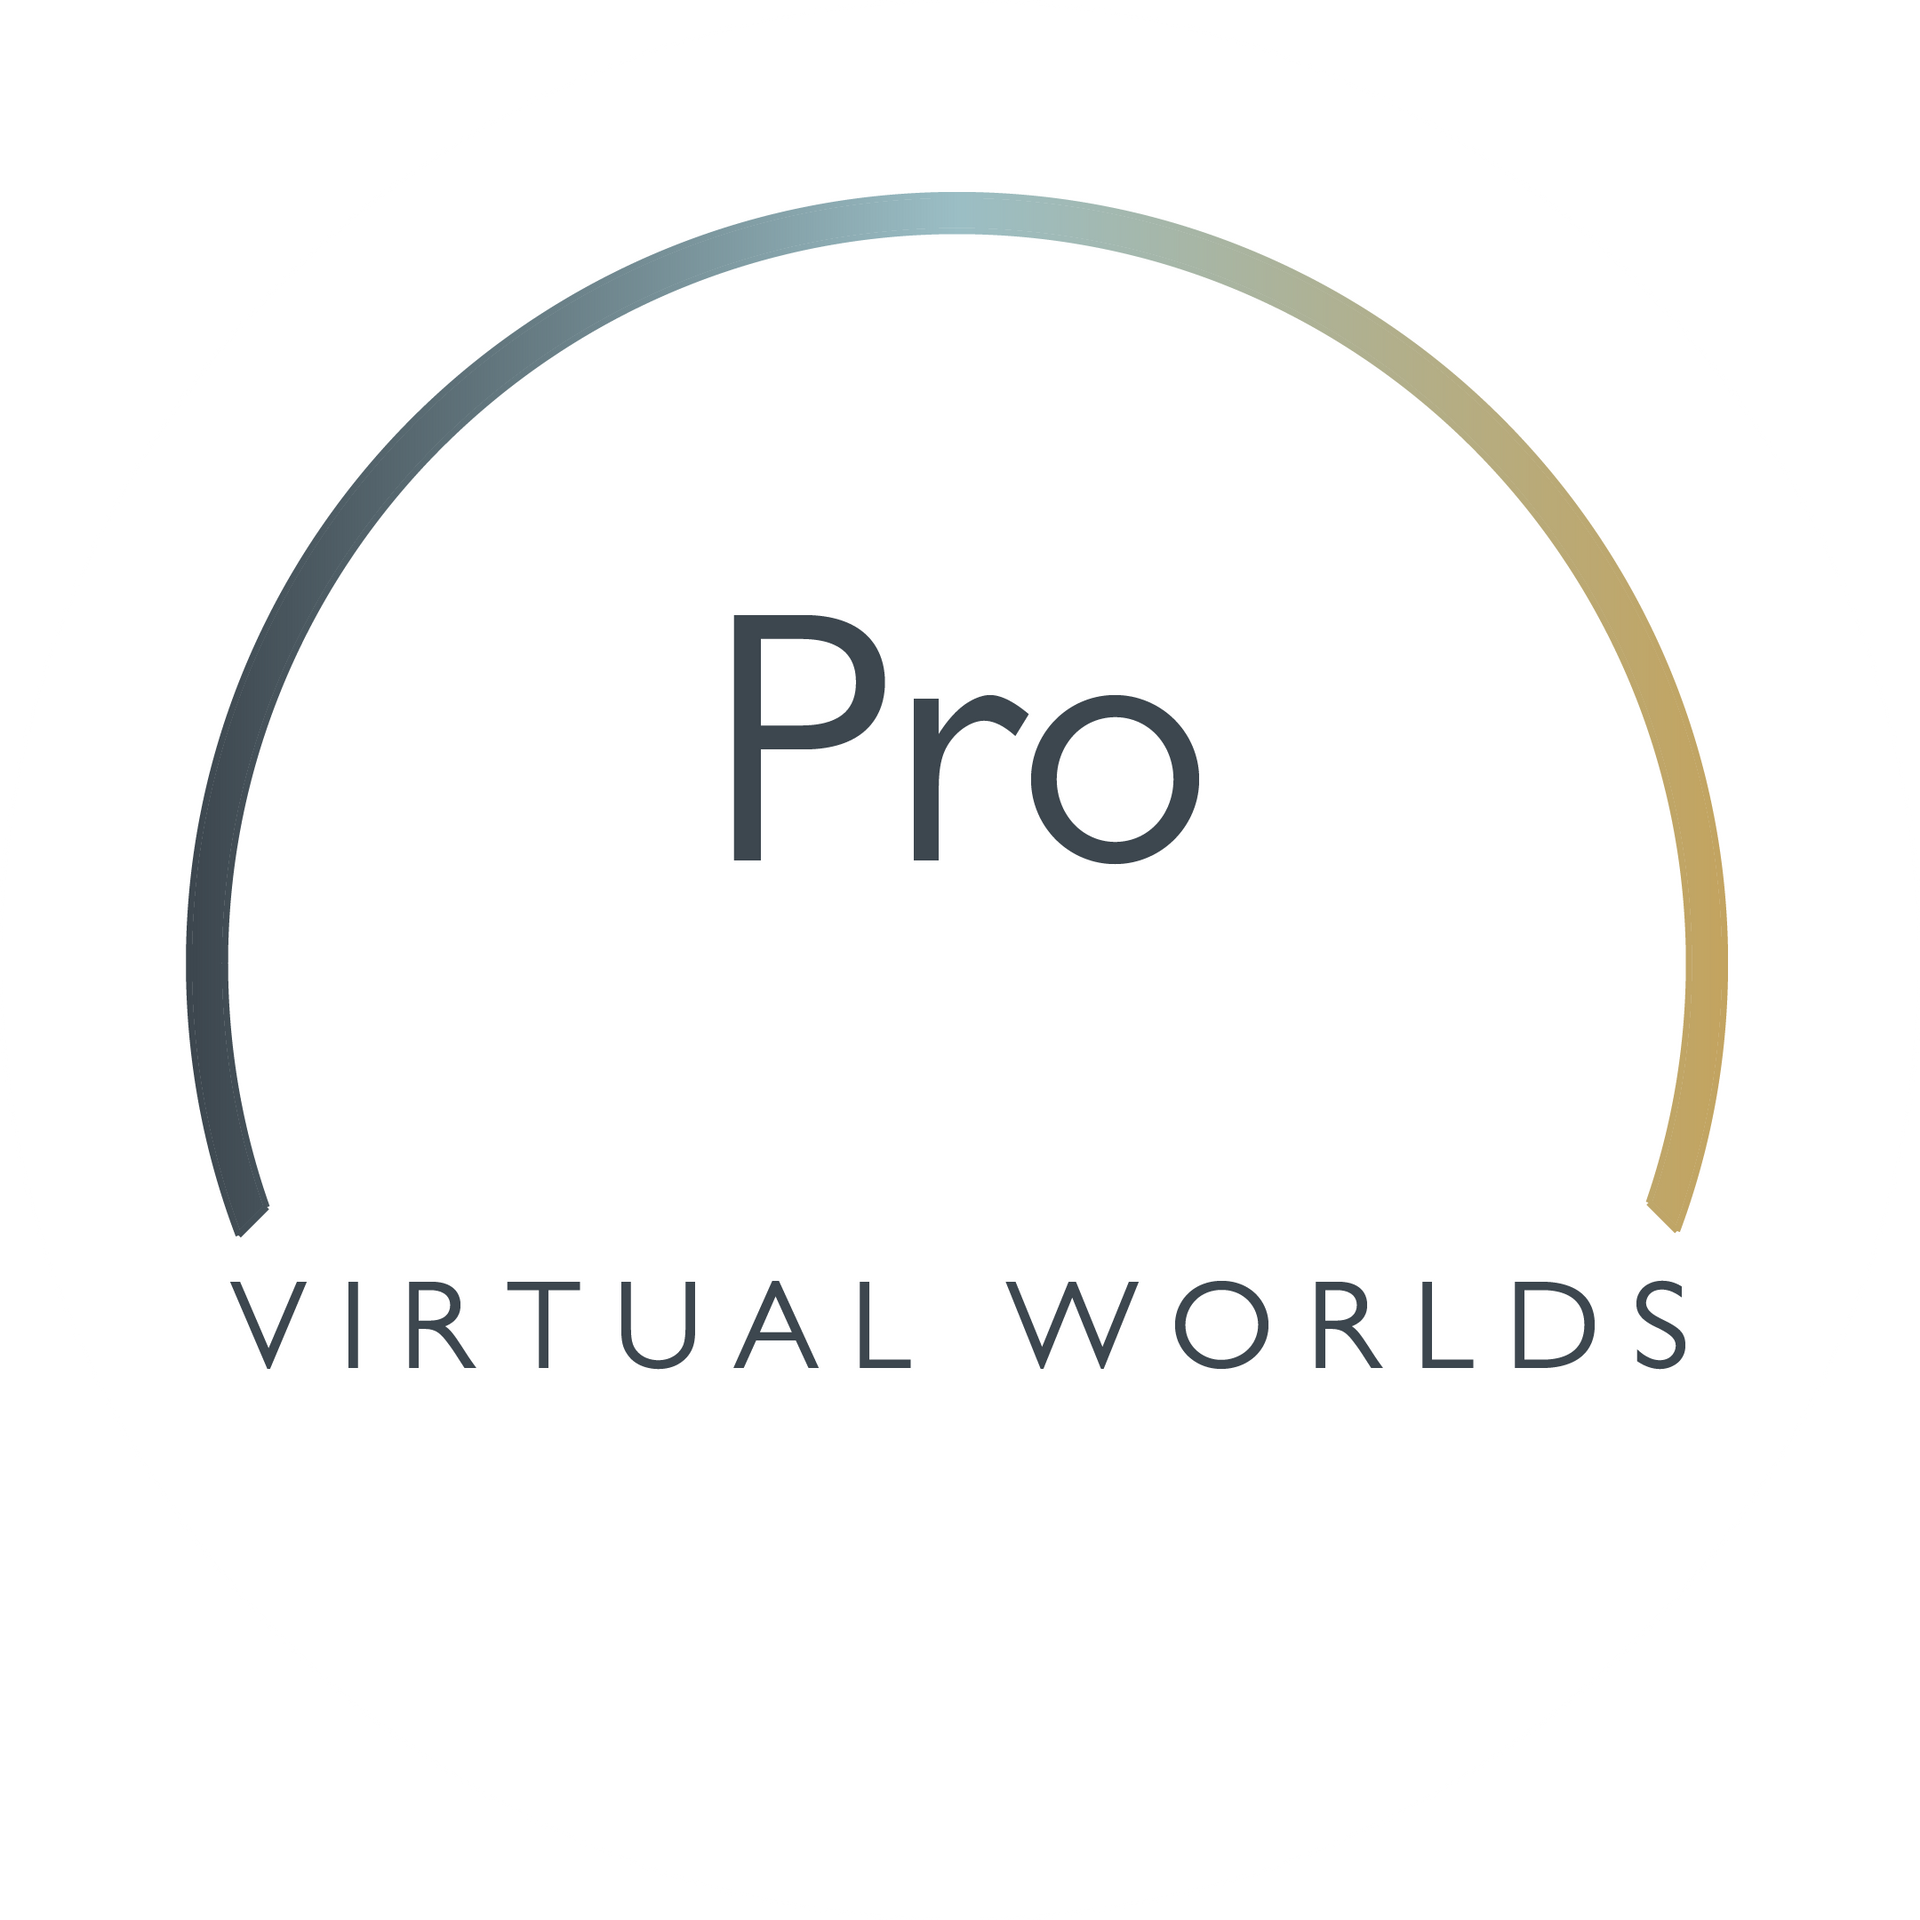 The logo for pro virtual worlds is a circle with a gradient in the middle.